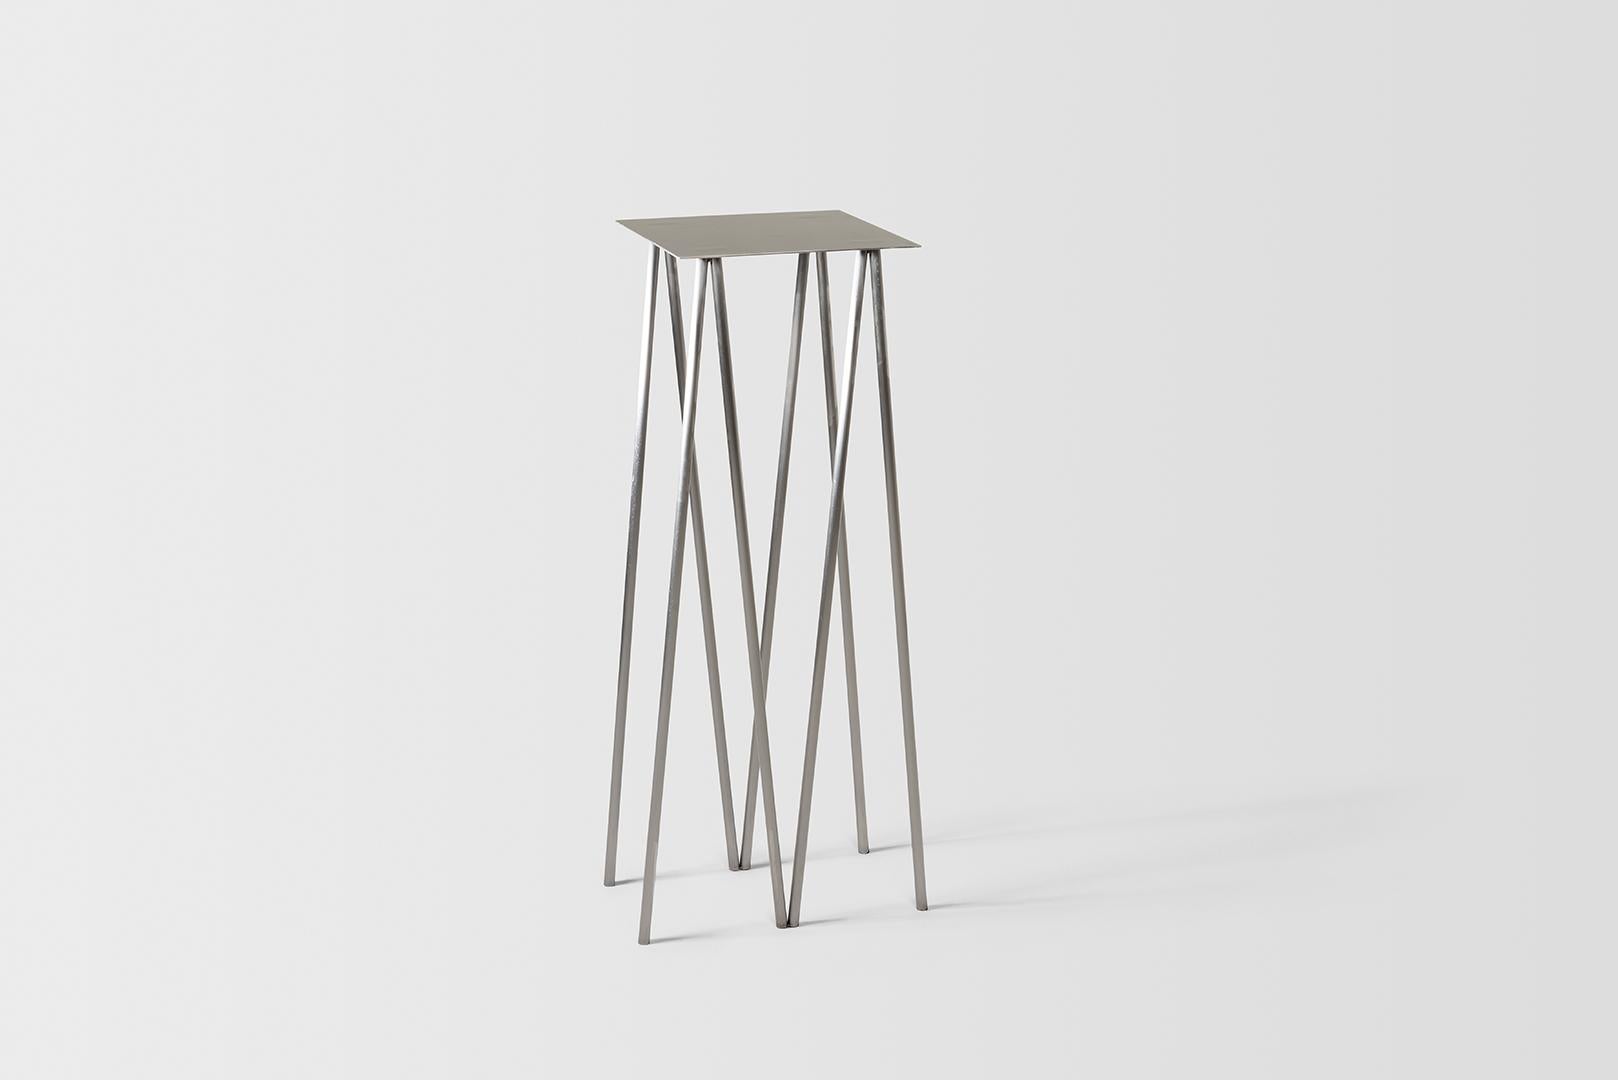 Where metal implies sturdiness, and calls for strong Industrial motifs - the I/ the H, the beam / the cross, the Paper Table is a play on our own sense of balance. 

It questions the thinness of both surface and structure, in order to reach their